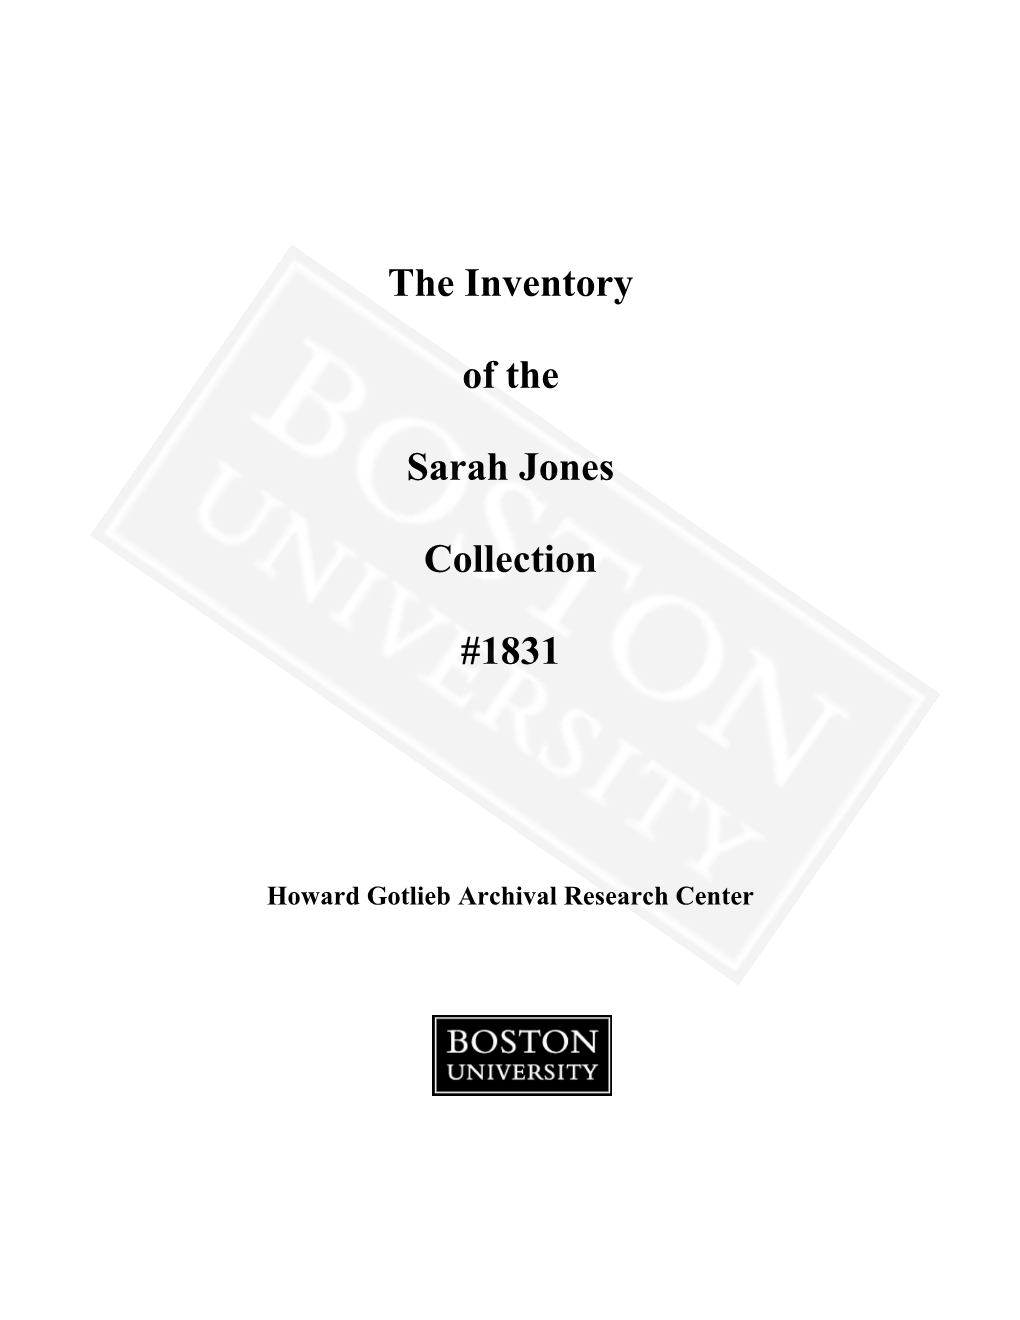 The Inventory of the Sarah Jones Collection #1831